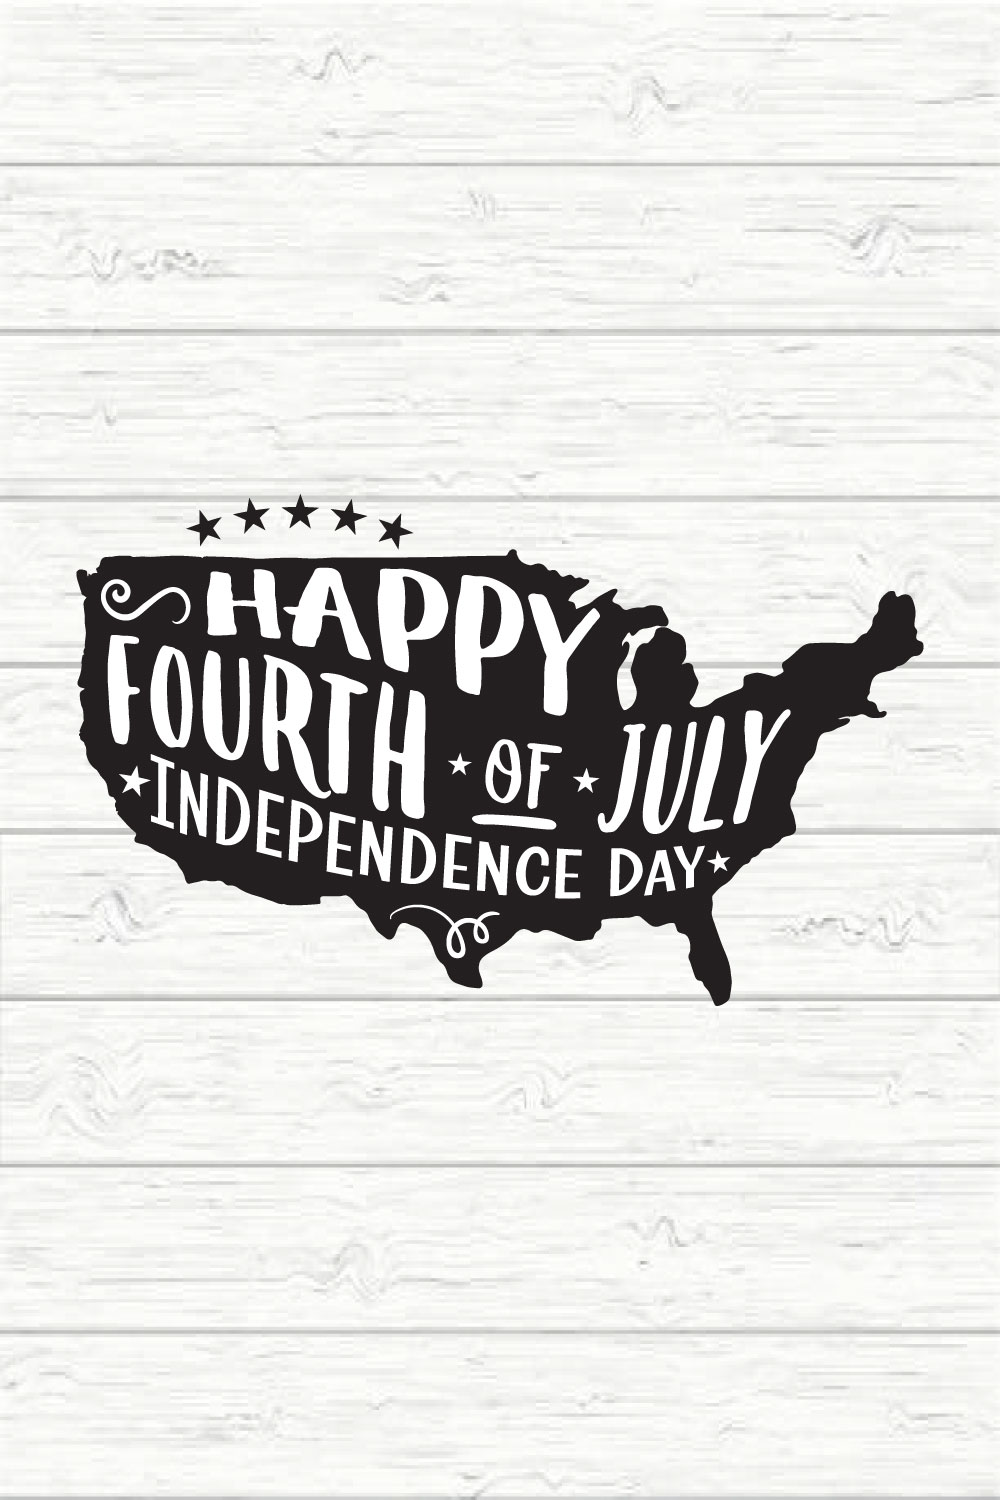 Happy Fourth Of July independence day pinterest preview image.